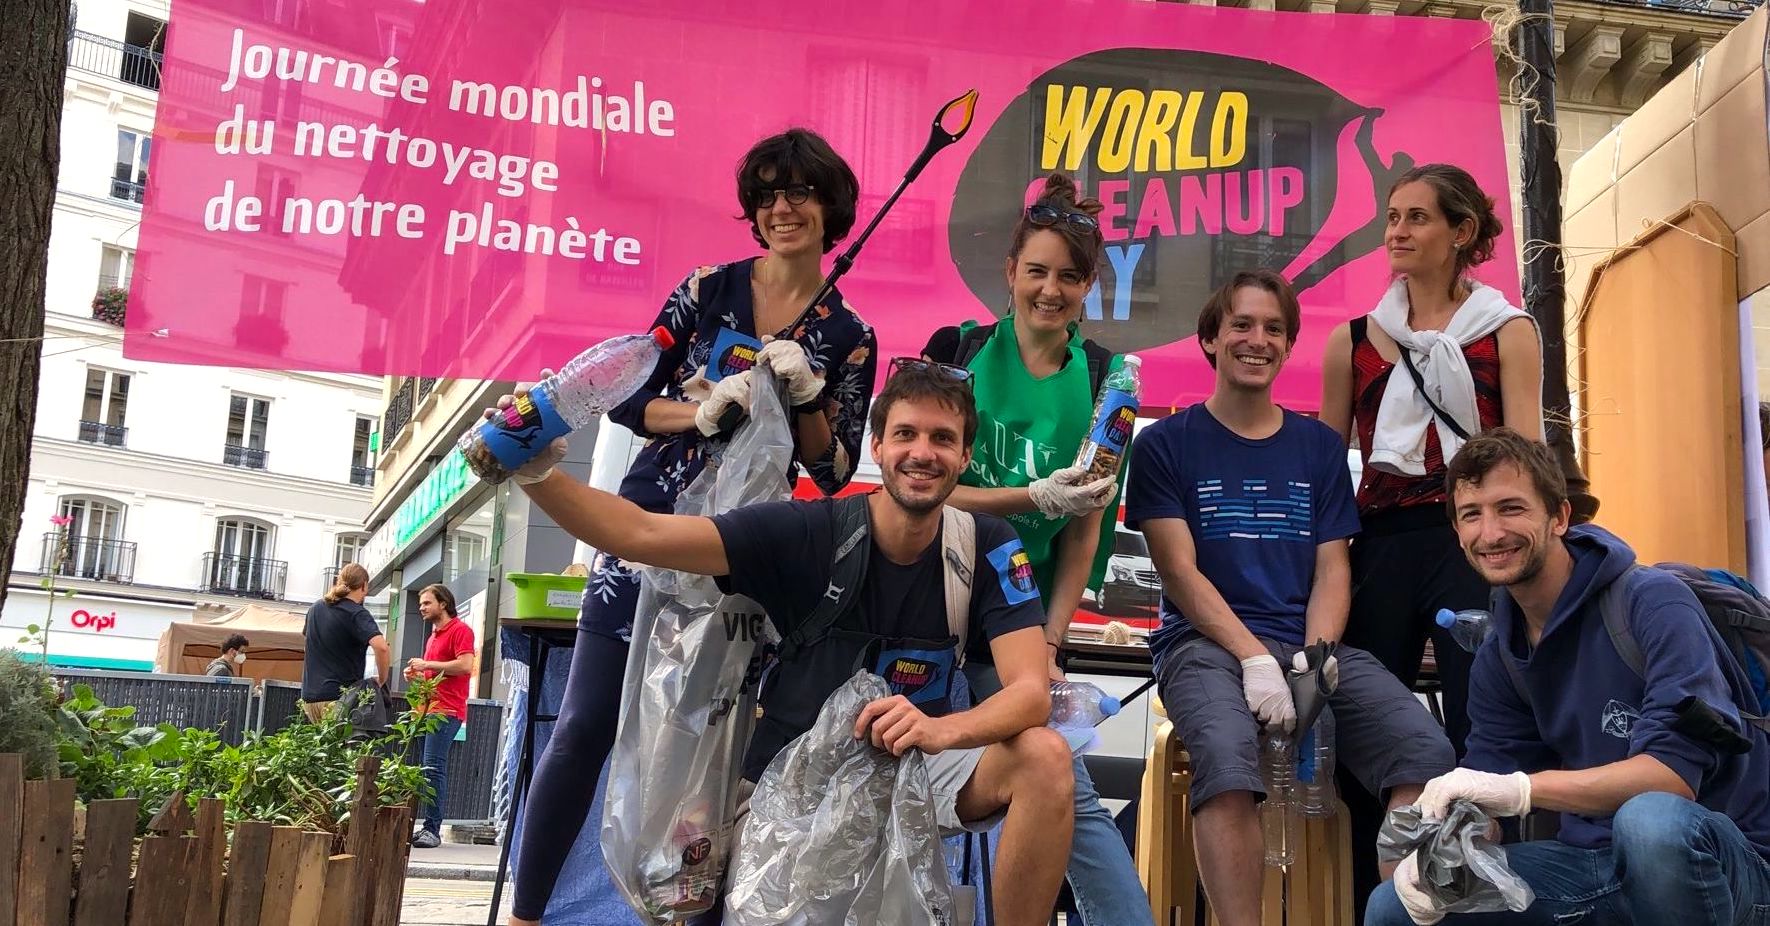 (c) Worldcleanupday.fr